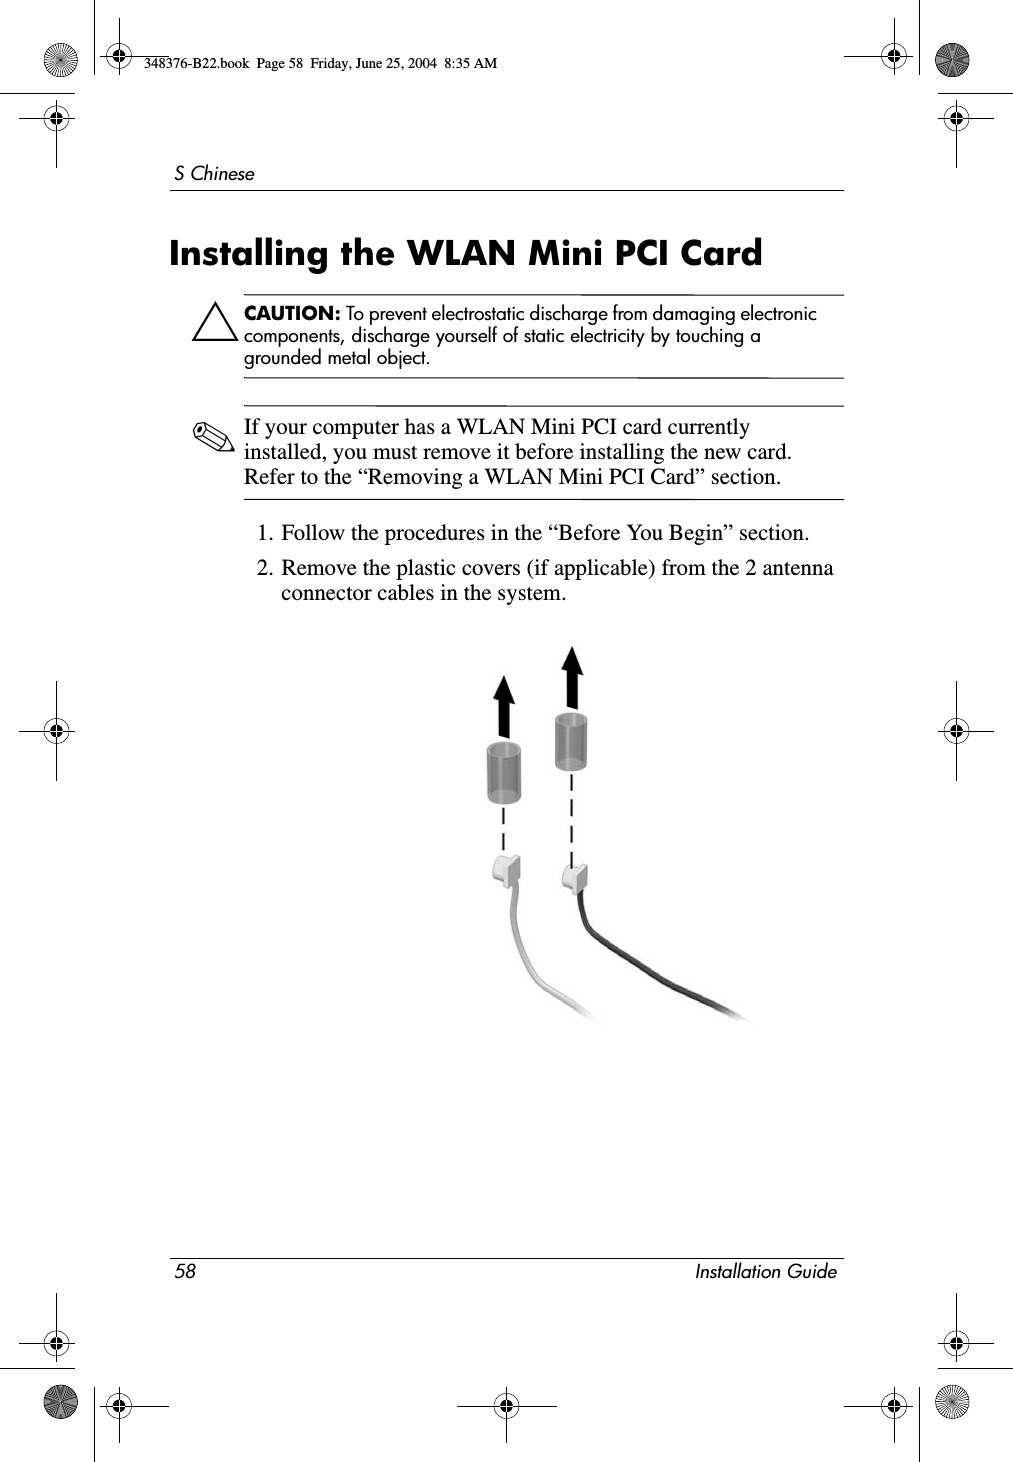 58 Installation GuideS ChineseInstalling the WLAN Mini PCI CardÄCAUTION: To prevent electrostatic discharge from damaging electronic components, discharge yourself of static electricity by touching a grounded metal object.✎If your computer has a WLAN Mini PCI card currently installed, you must remove it before installing the new card. Refer to the “Removing a WLAN Mini PCI Card” section.1. Follow the procedures in the “Before You Begin” section.2. Remove the plastic covers (if applicable) from the 2 antenna connector cables in the system.348376-B22.book  Page 58  Friday, June 25, 2004  8:35 AM